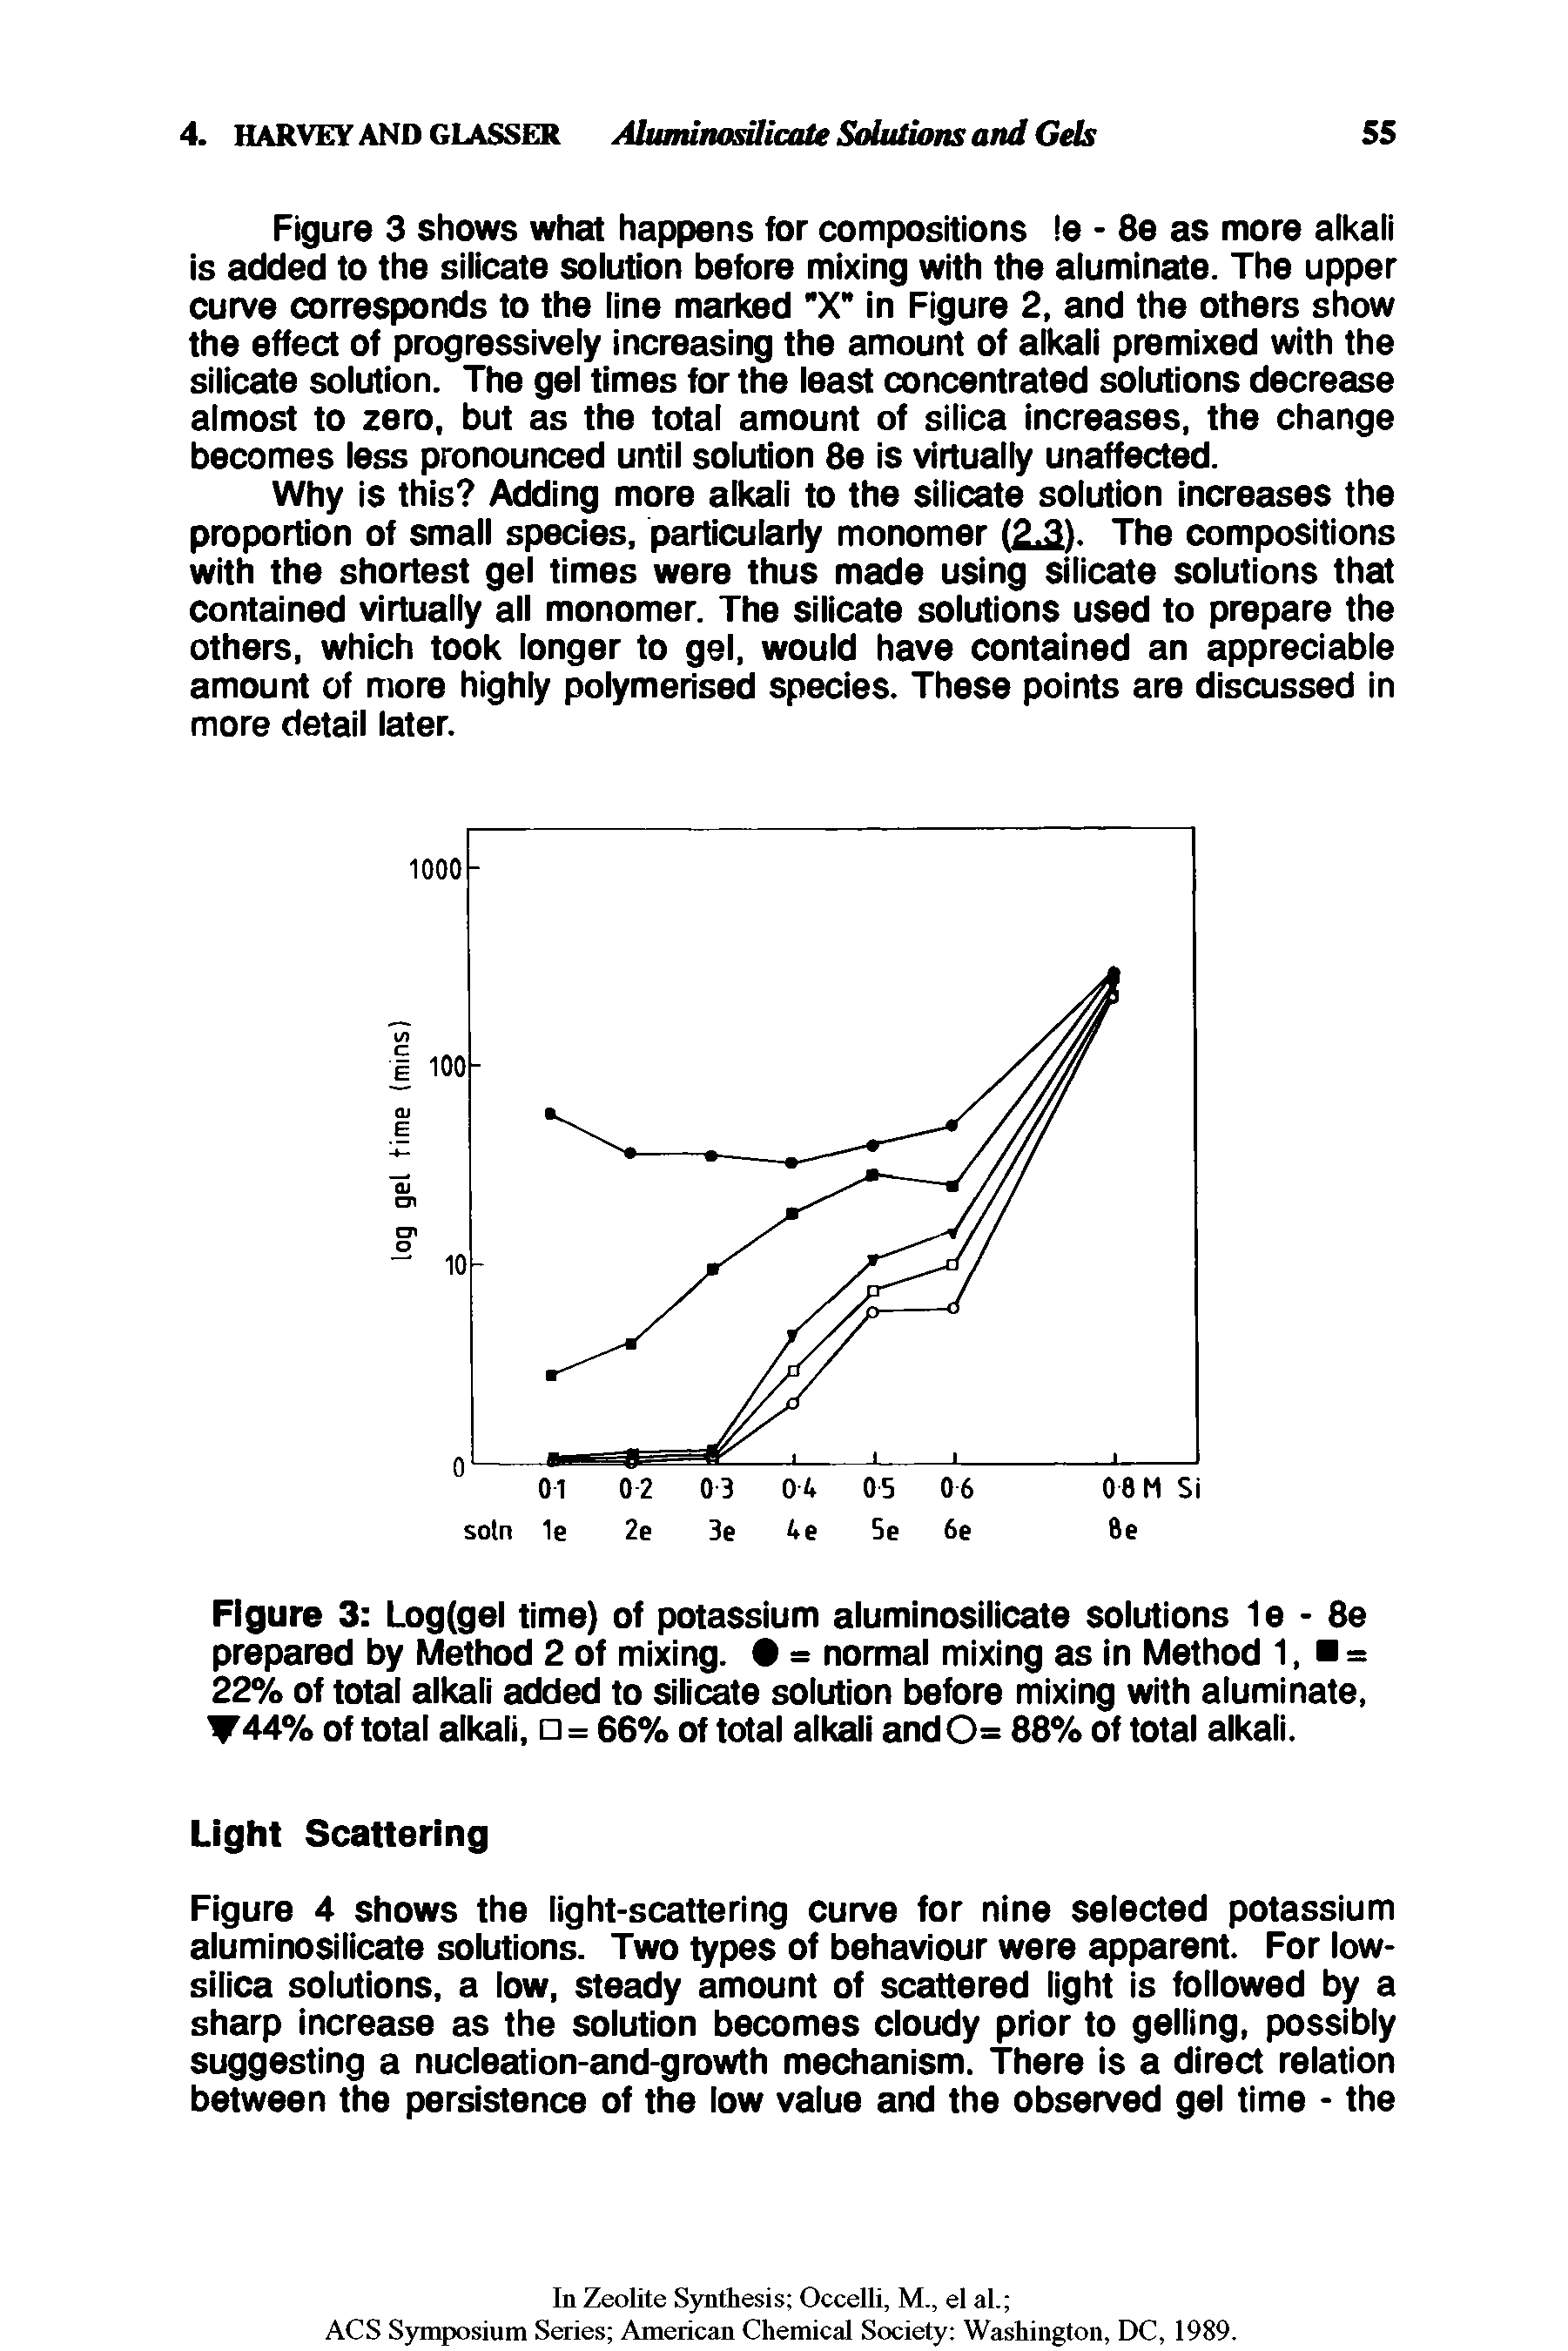 Figure 3 Log(gel time) of potassium aluminosilicate solutions 1e - 8e prepared by Method 2 of mixing. = normal mixing as in Method 1, = 22% of total alkali added to silicate solution before mixing with aluminate, 44% of total alkali, = 66% of total alkali and 0= 88% of total alkali.